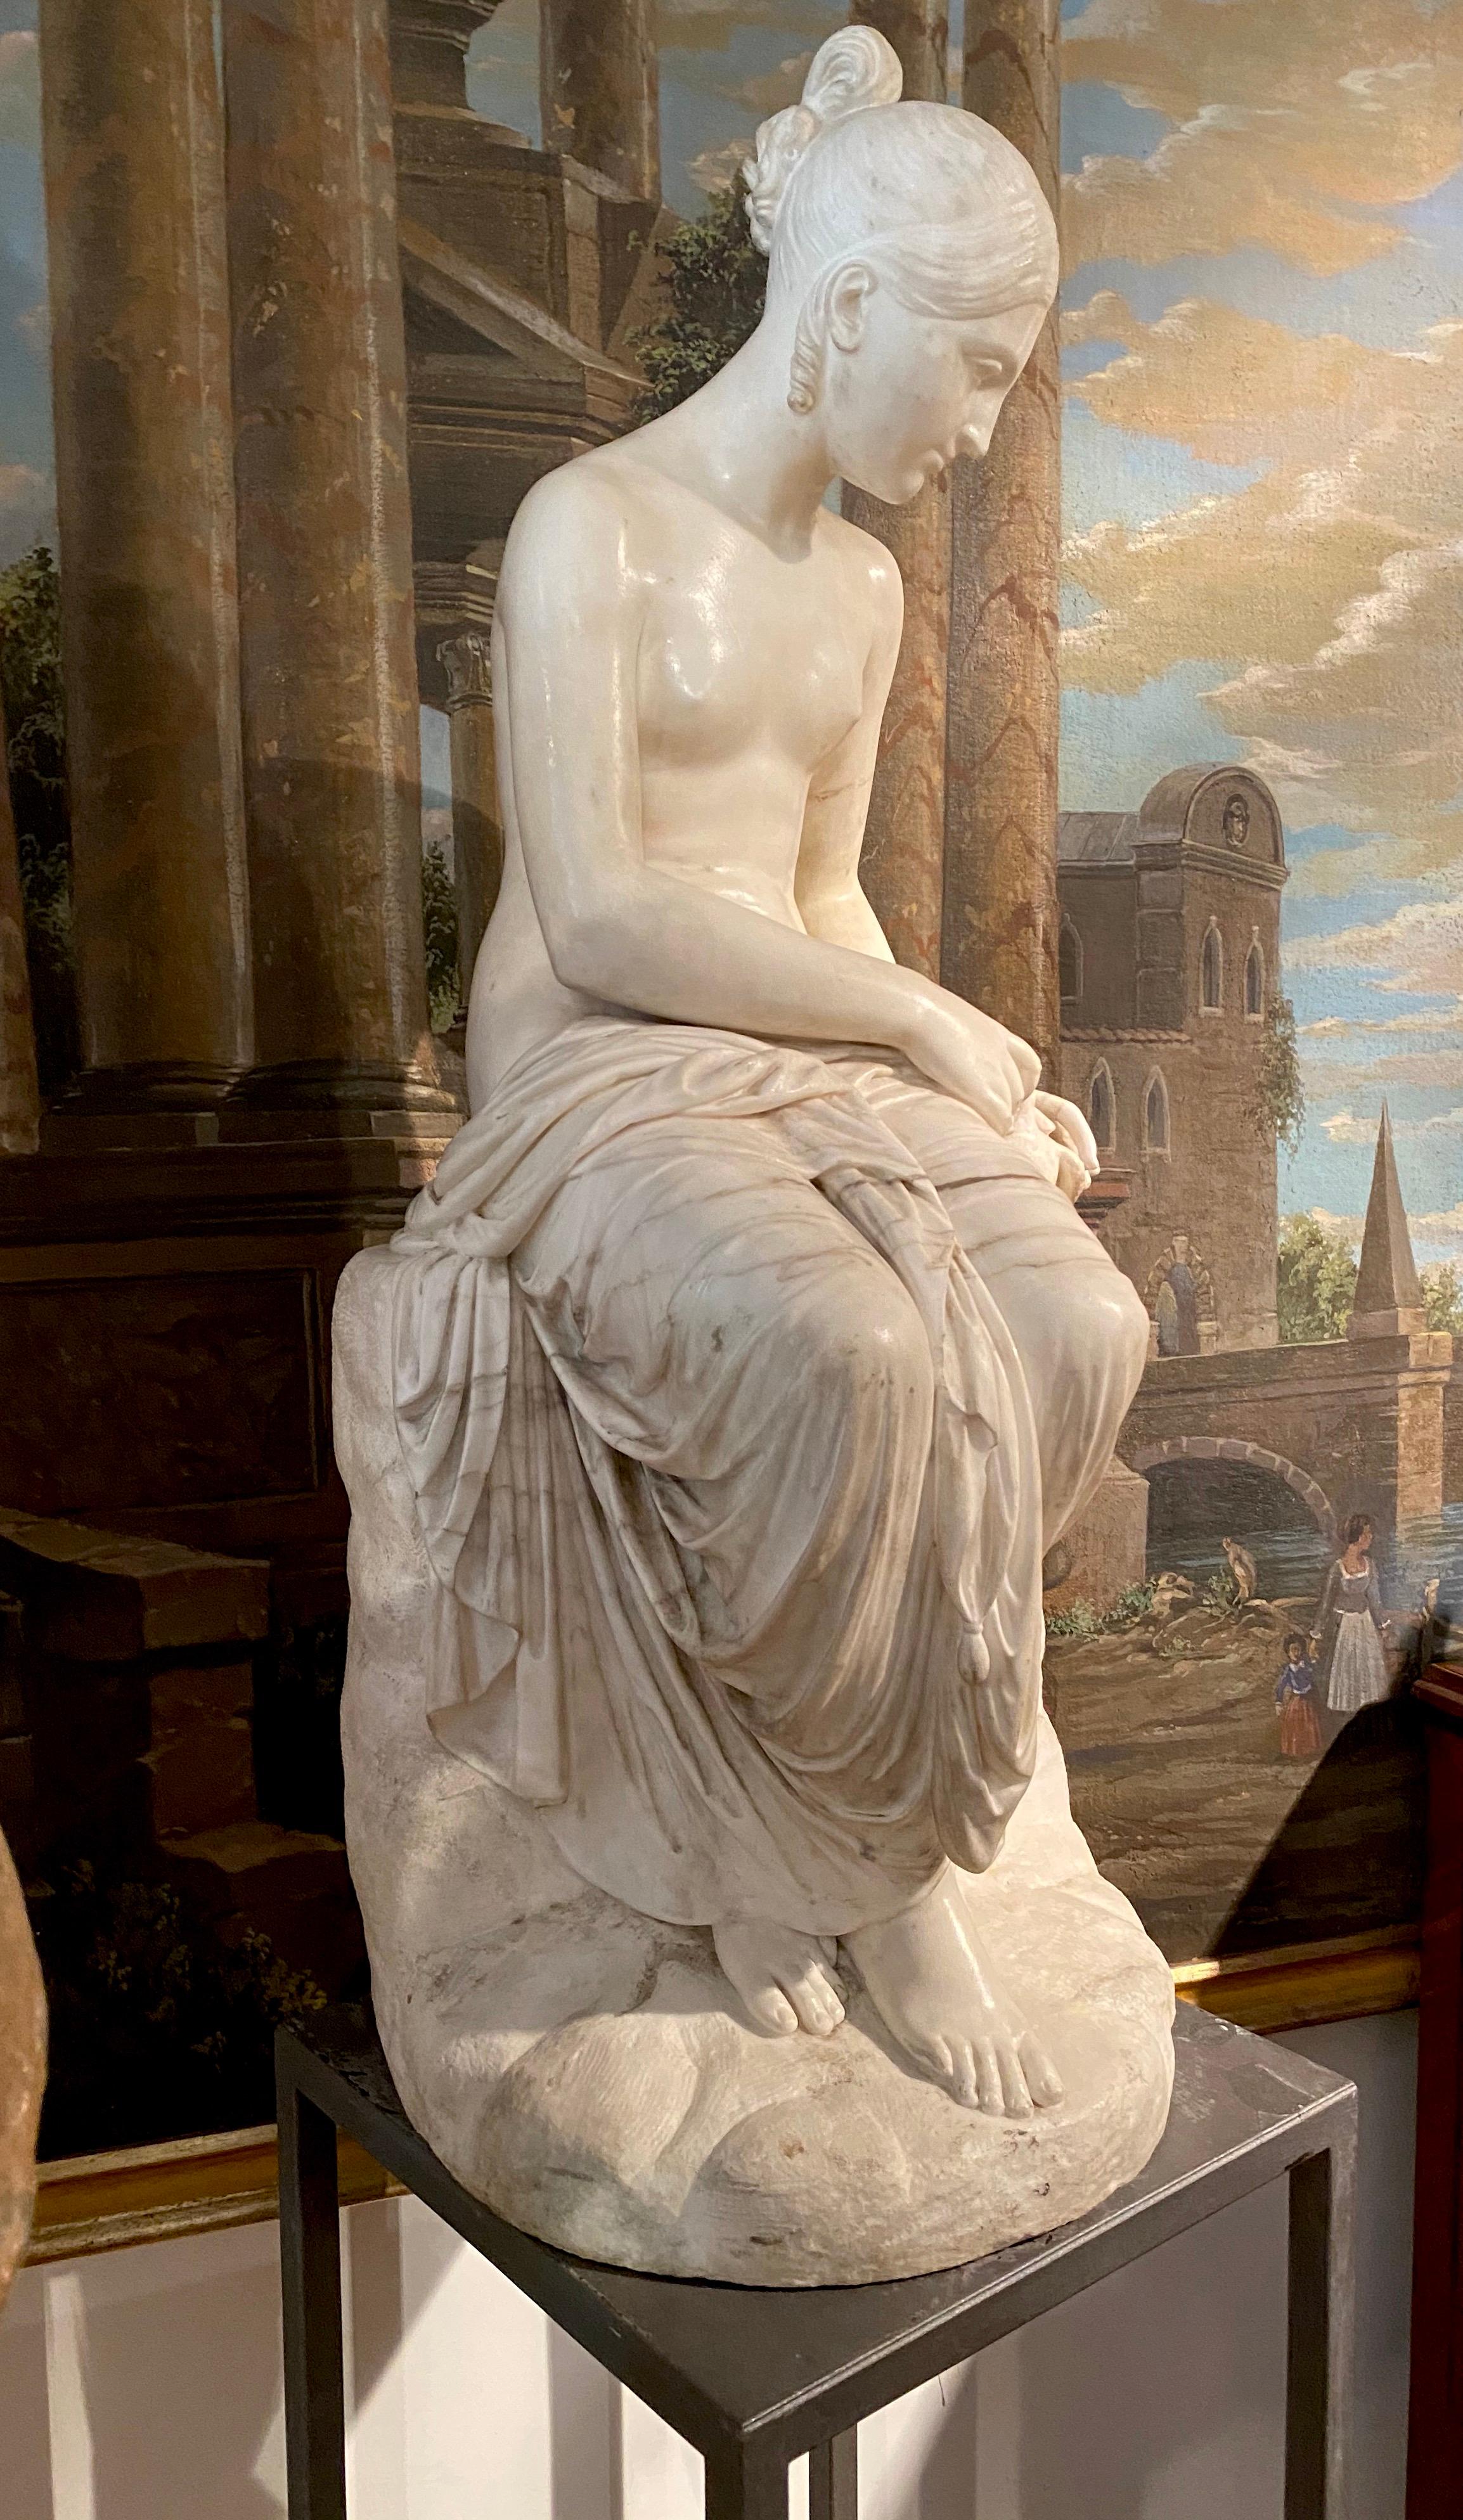 Fine Neoclassical White Marble Sculpture of Seated Nymph 1820 - Brown Nude Sculpture by Lorenzo Bartolini